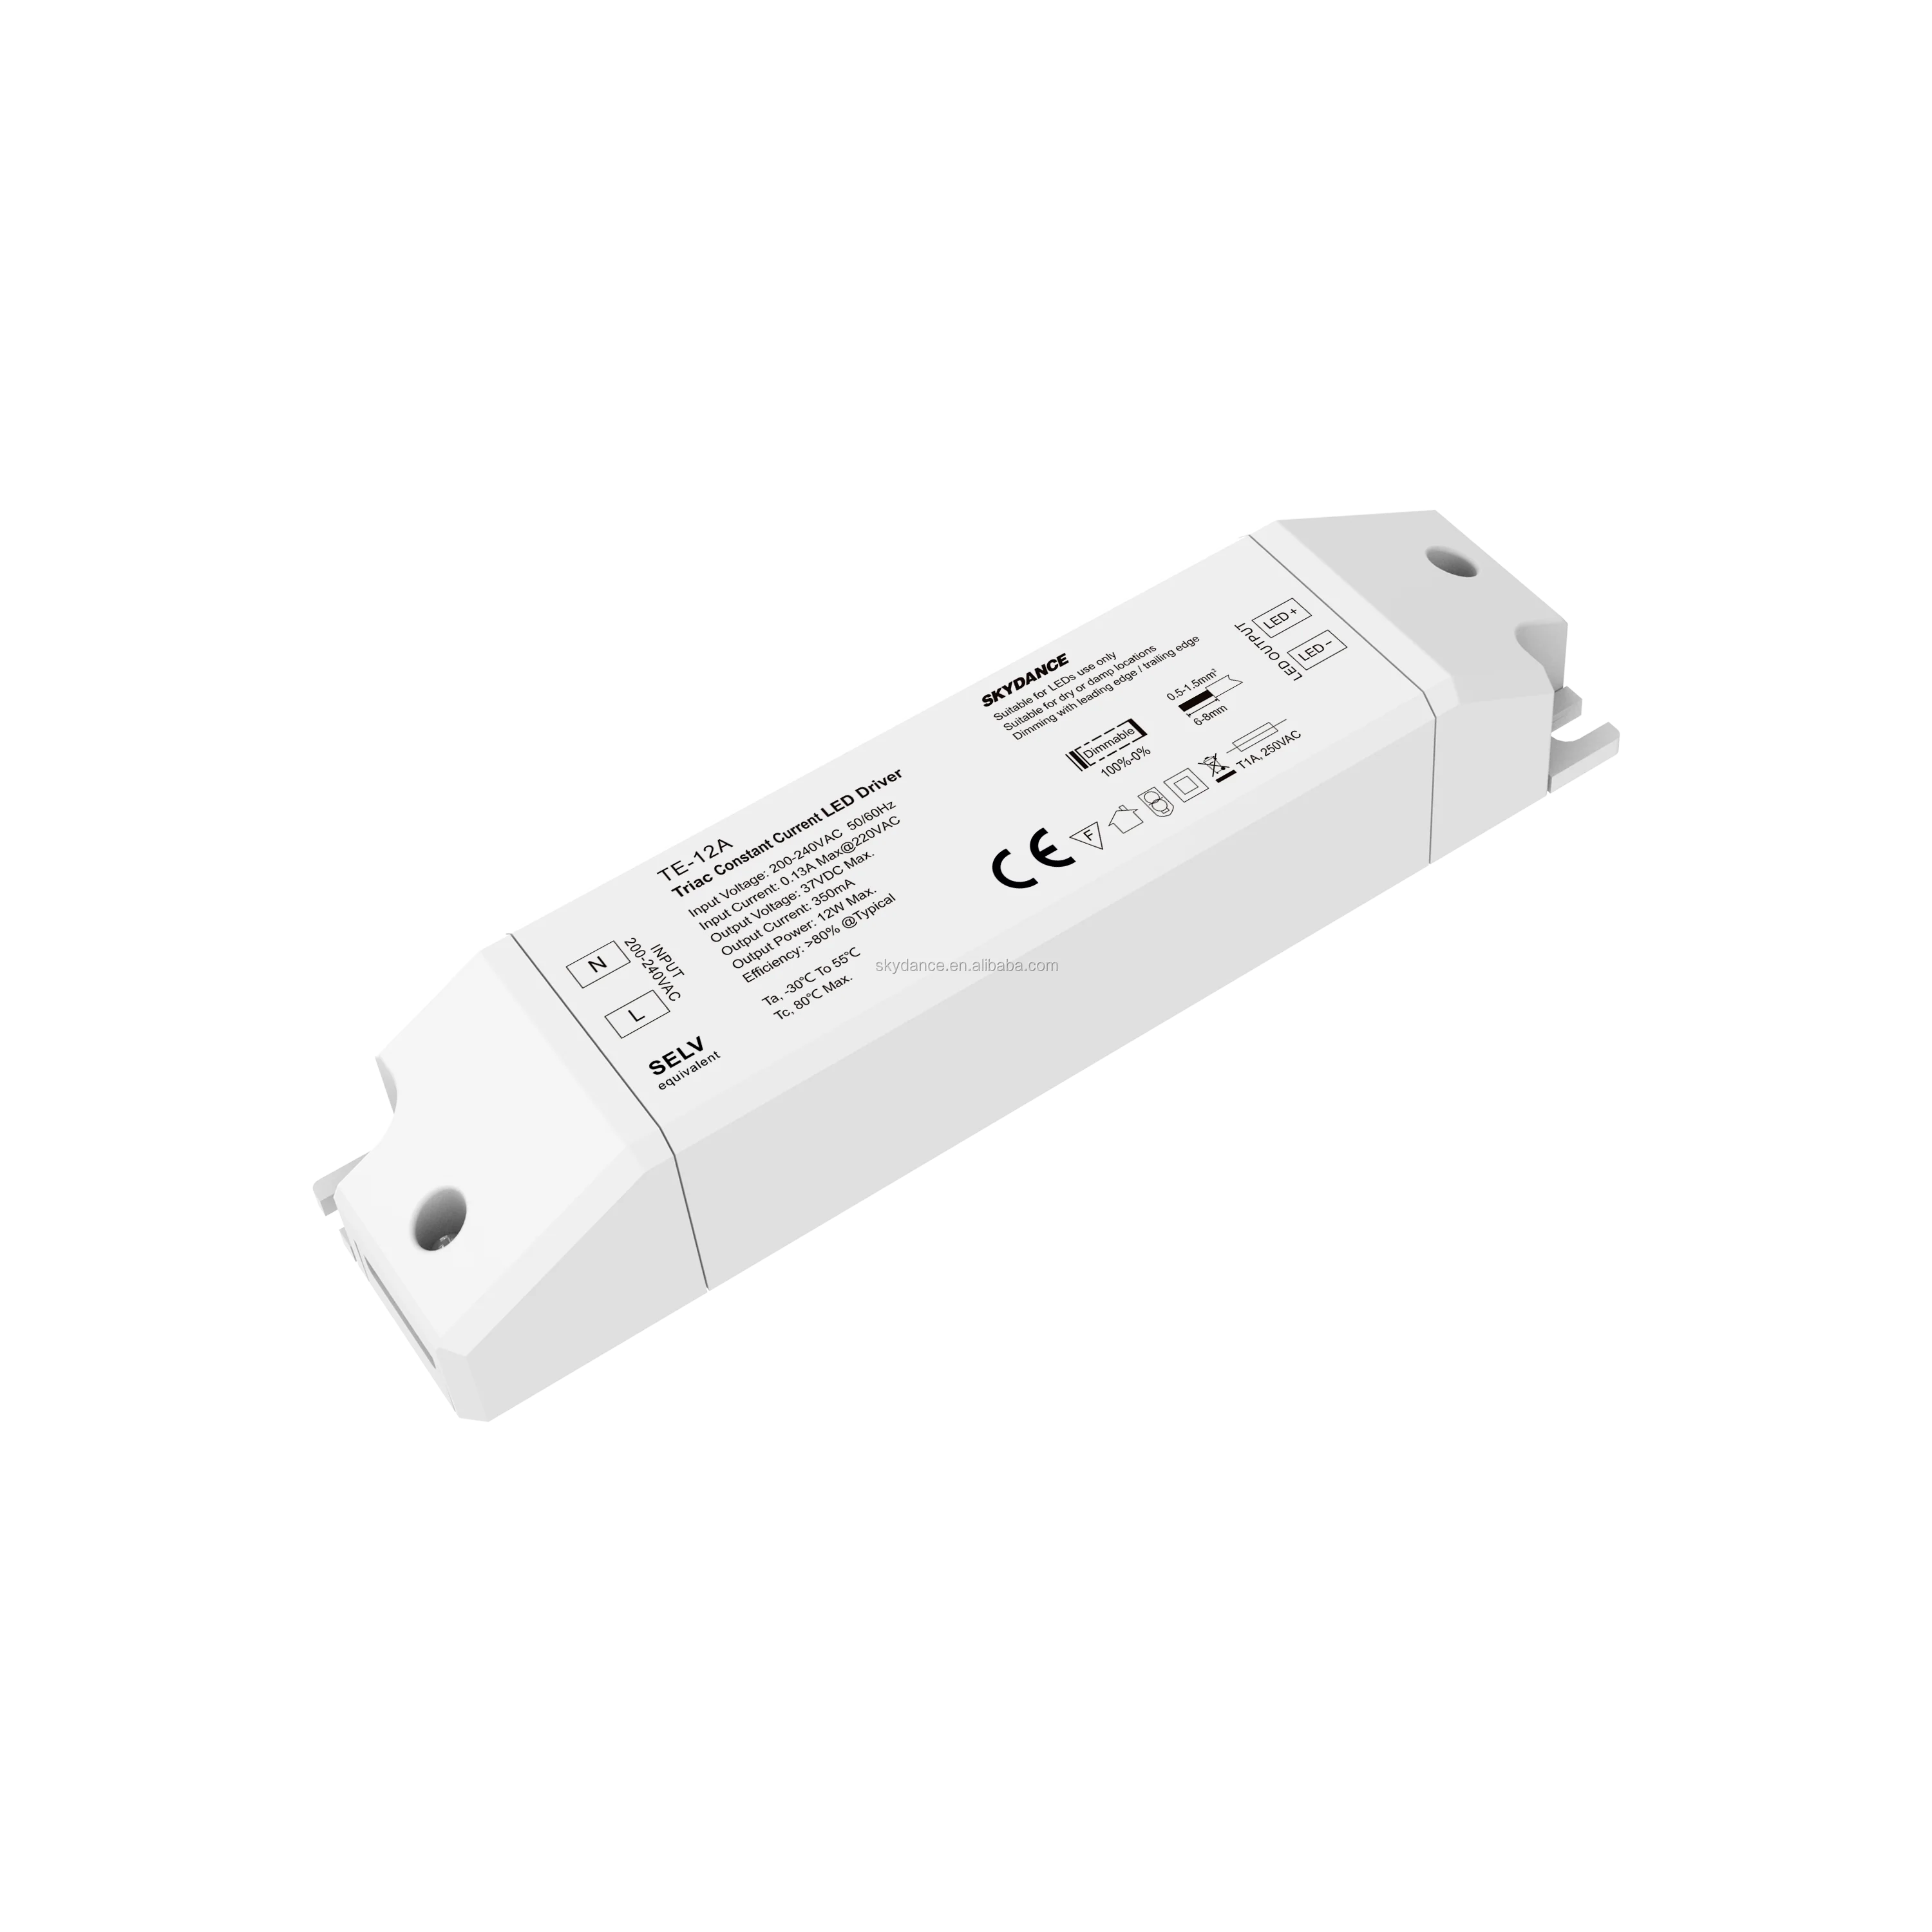 paling hebzuchtig Ochtend gymnastiek Skydance Te-12a 12w 1 Channel Pwm Ac Push-dim Constant Current Triac Elv  Dimmable Driver - Buy 12w Dimmable Led Driver,Pwm Dimmable Led Driver,1  Channel Constant Current Led Driver Product on Alibaba.com